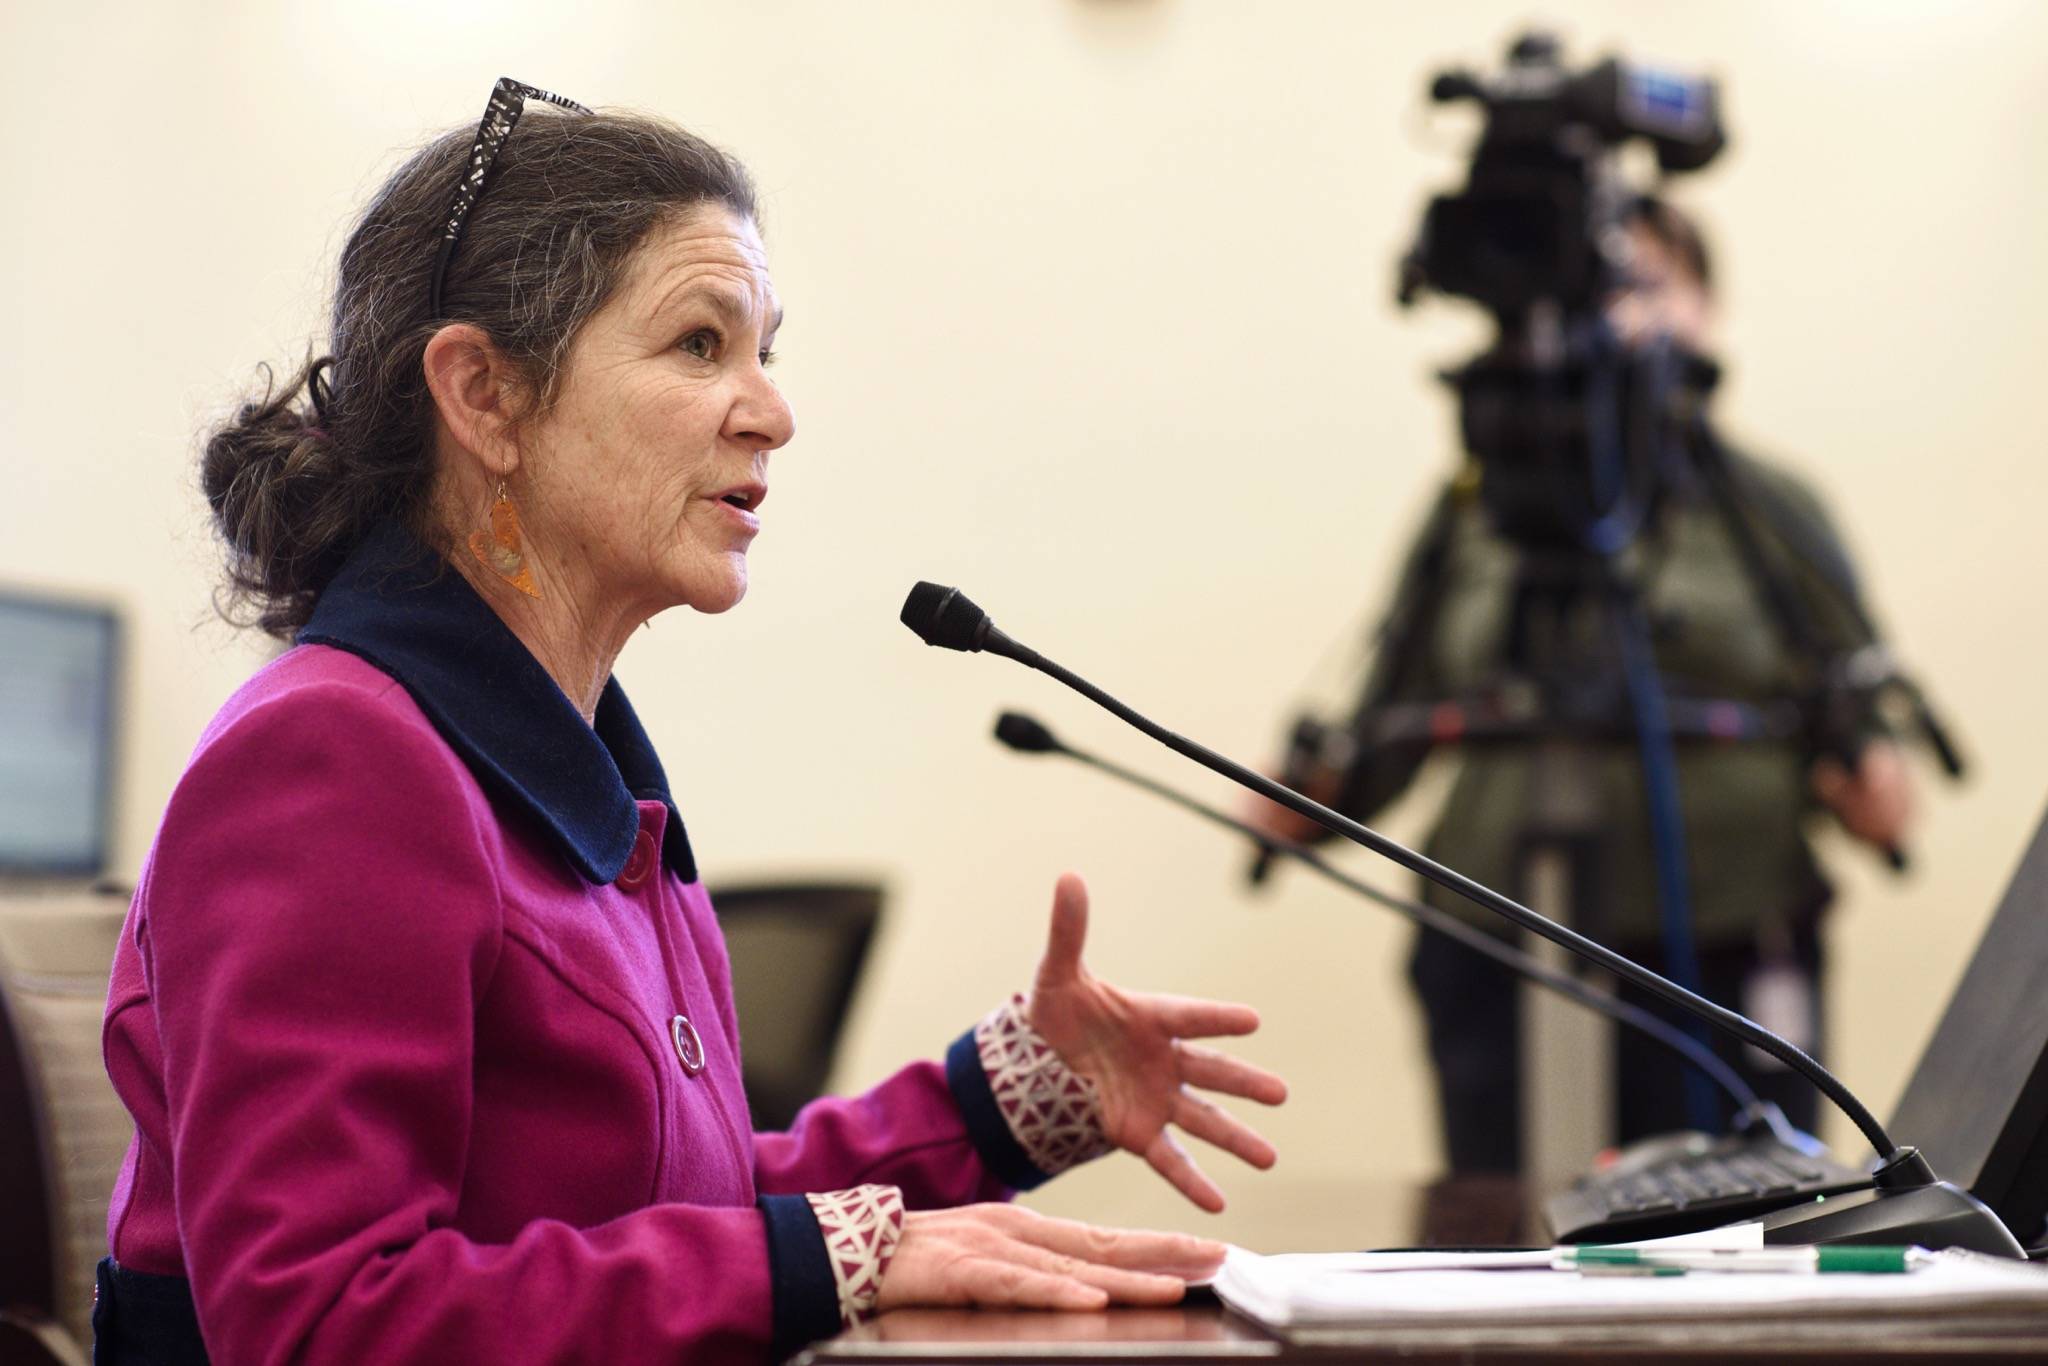 Carmen Lowry, Executive Director at Alaska Network on Domestic Violence and Sexual Assault, speaks to the Senate Judiciary Committee about SB 12, a crime bill, at the Capitol on Monday, March 4, 2019 in Juneau, Alaska. (Michael Penn | Juneau Empire)